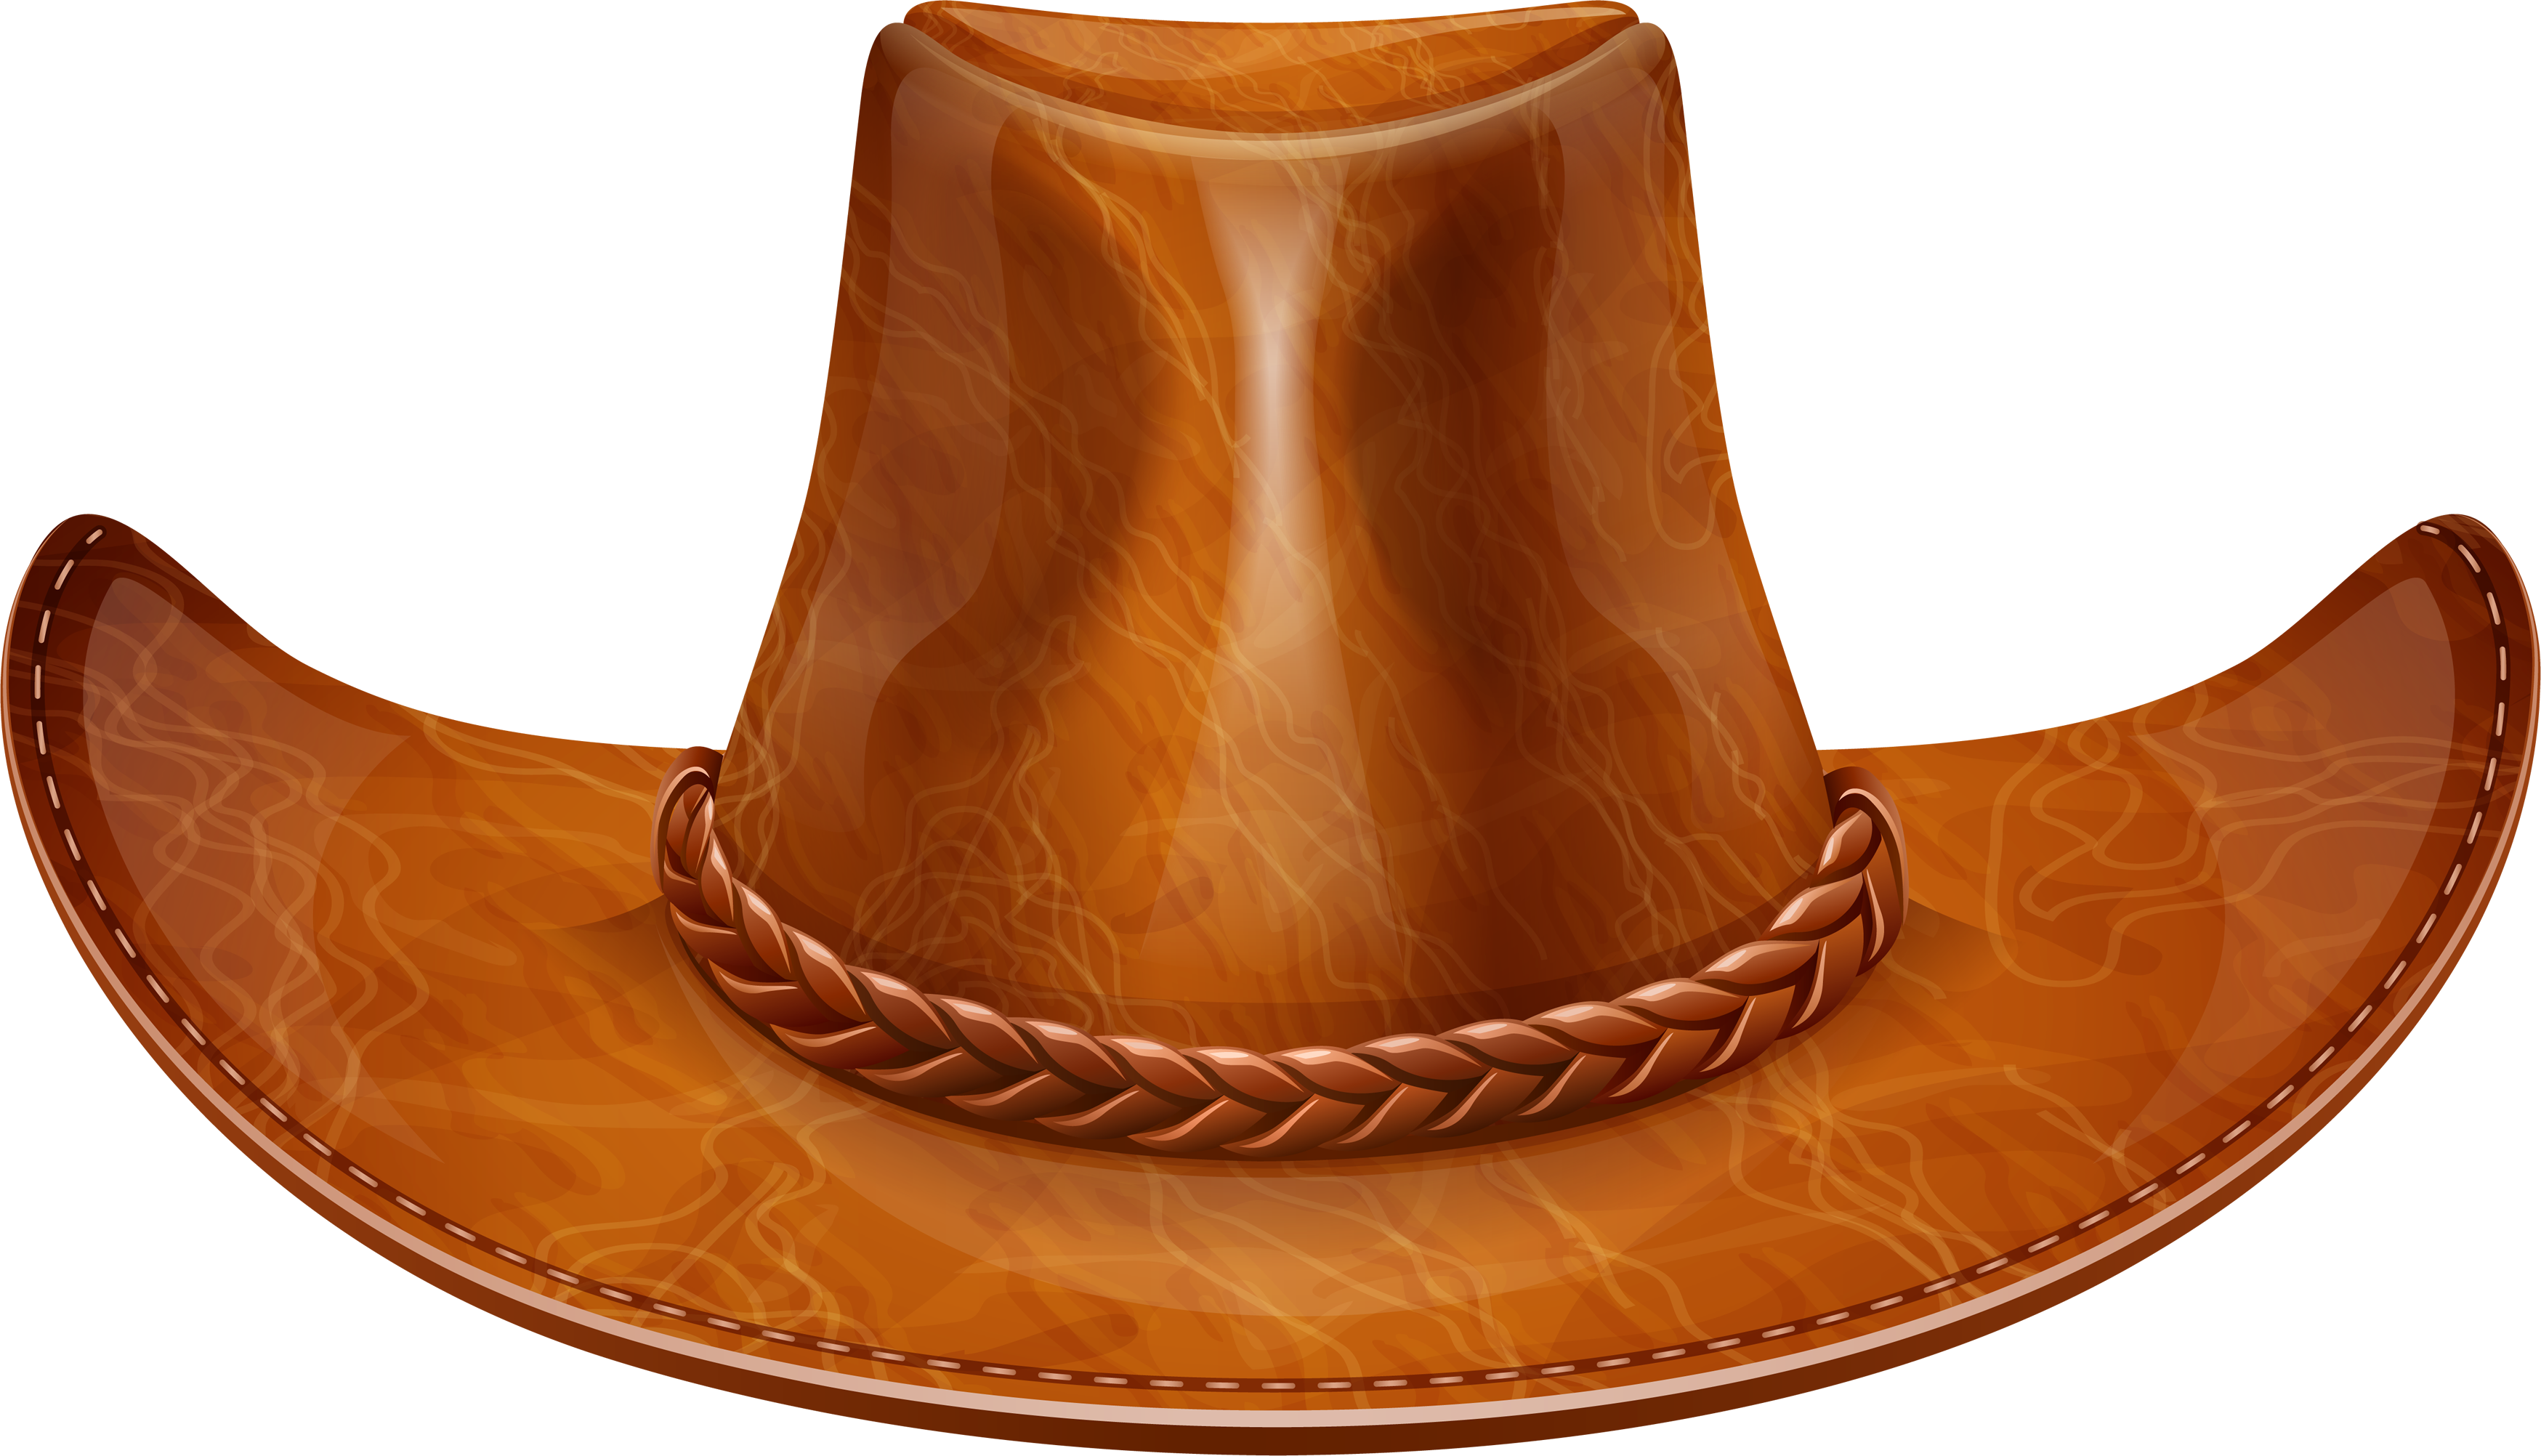 Cowboy hat clipart black and ... hat_PNG5706.png